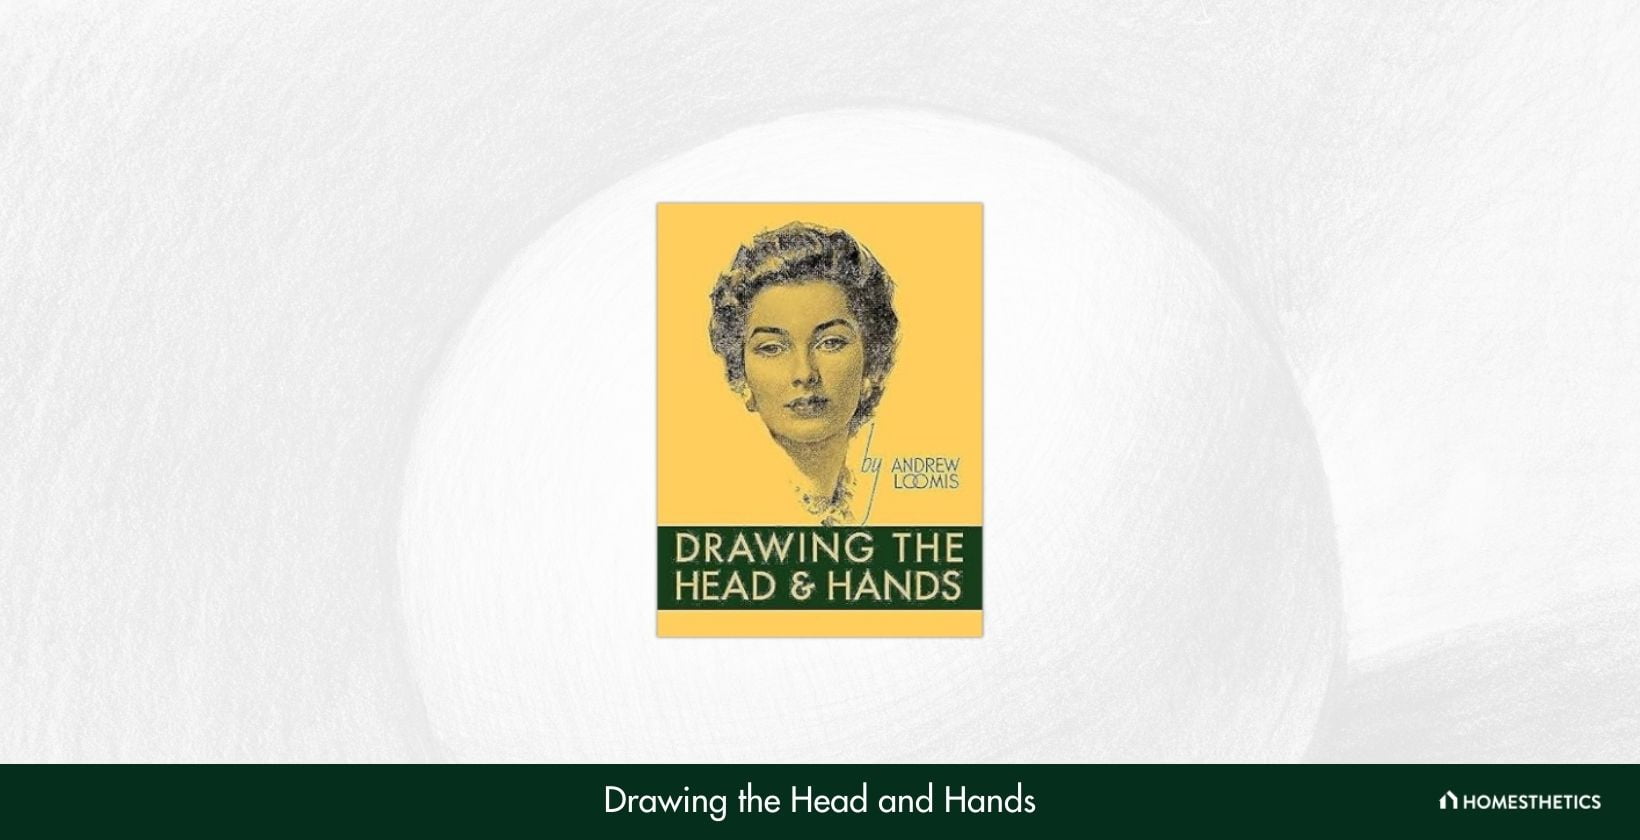 Drawing the Head and Hands by Andrew Loomis